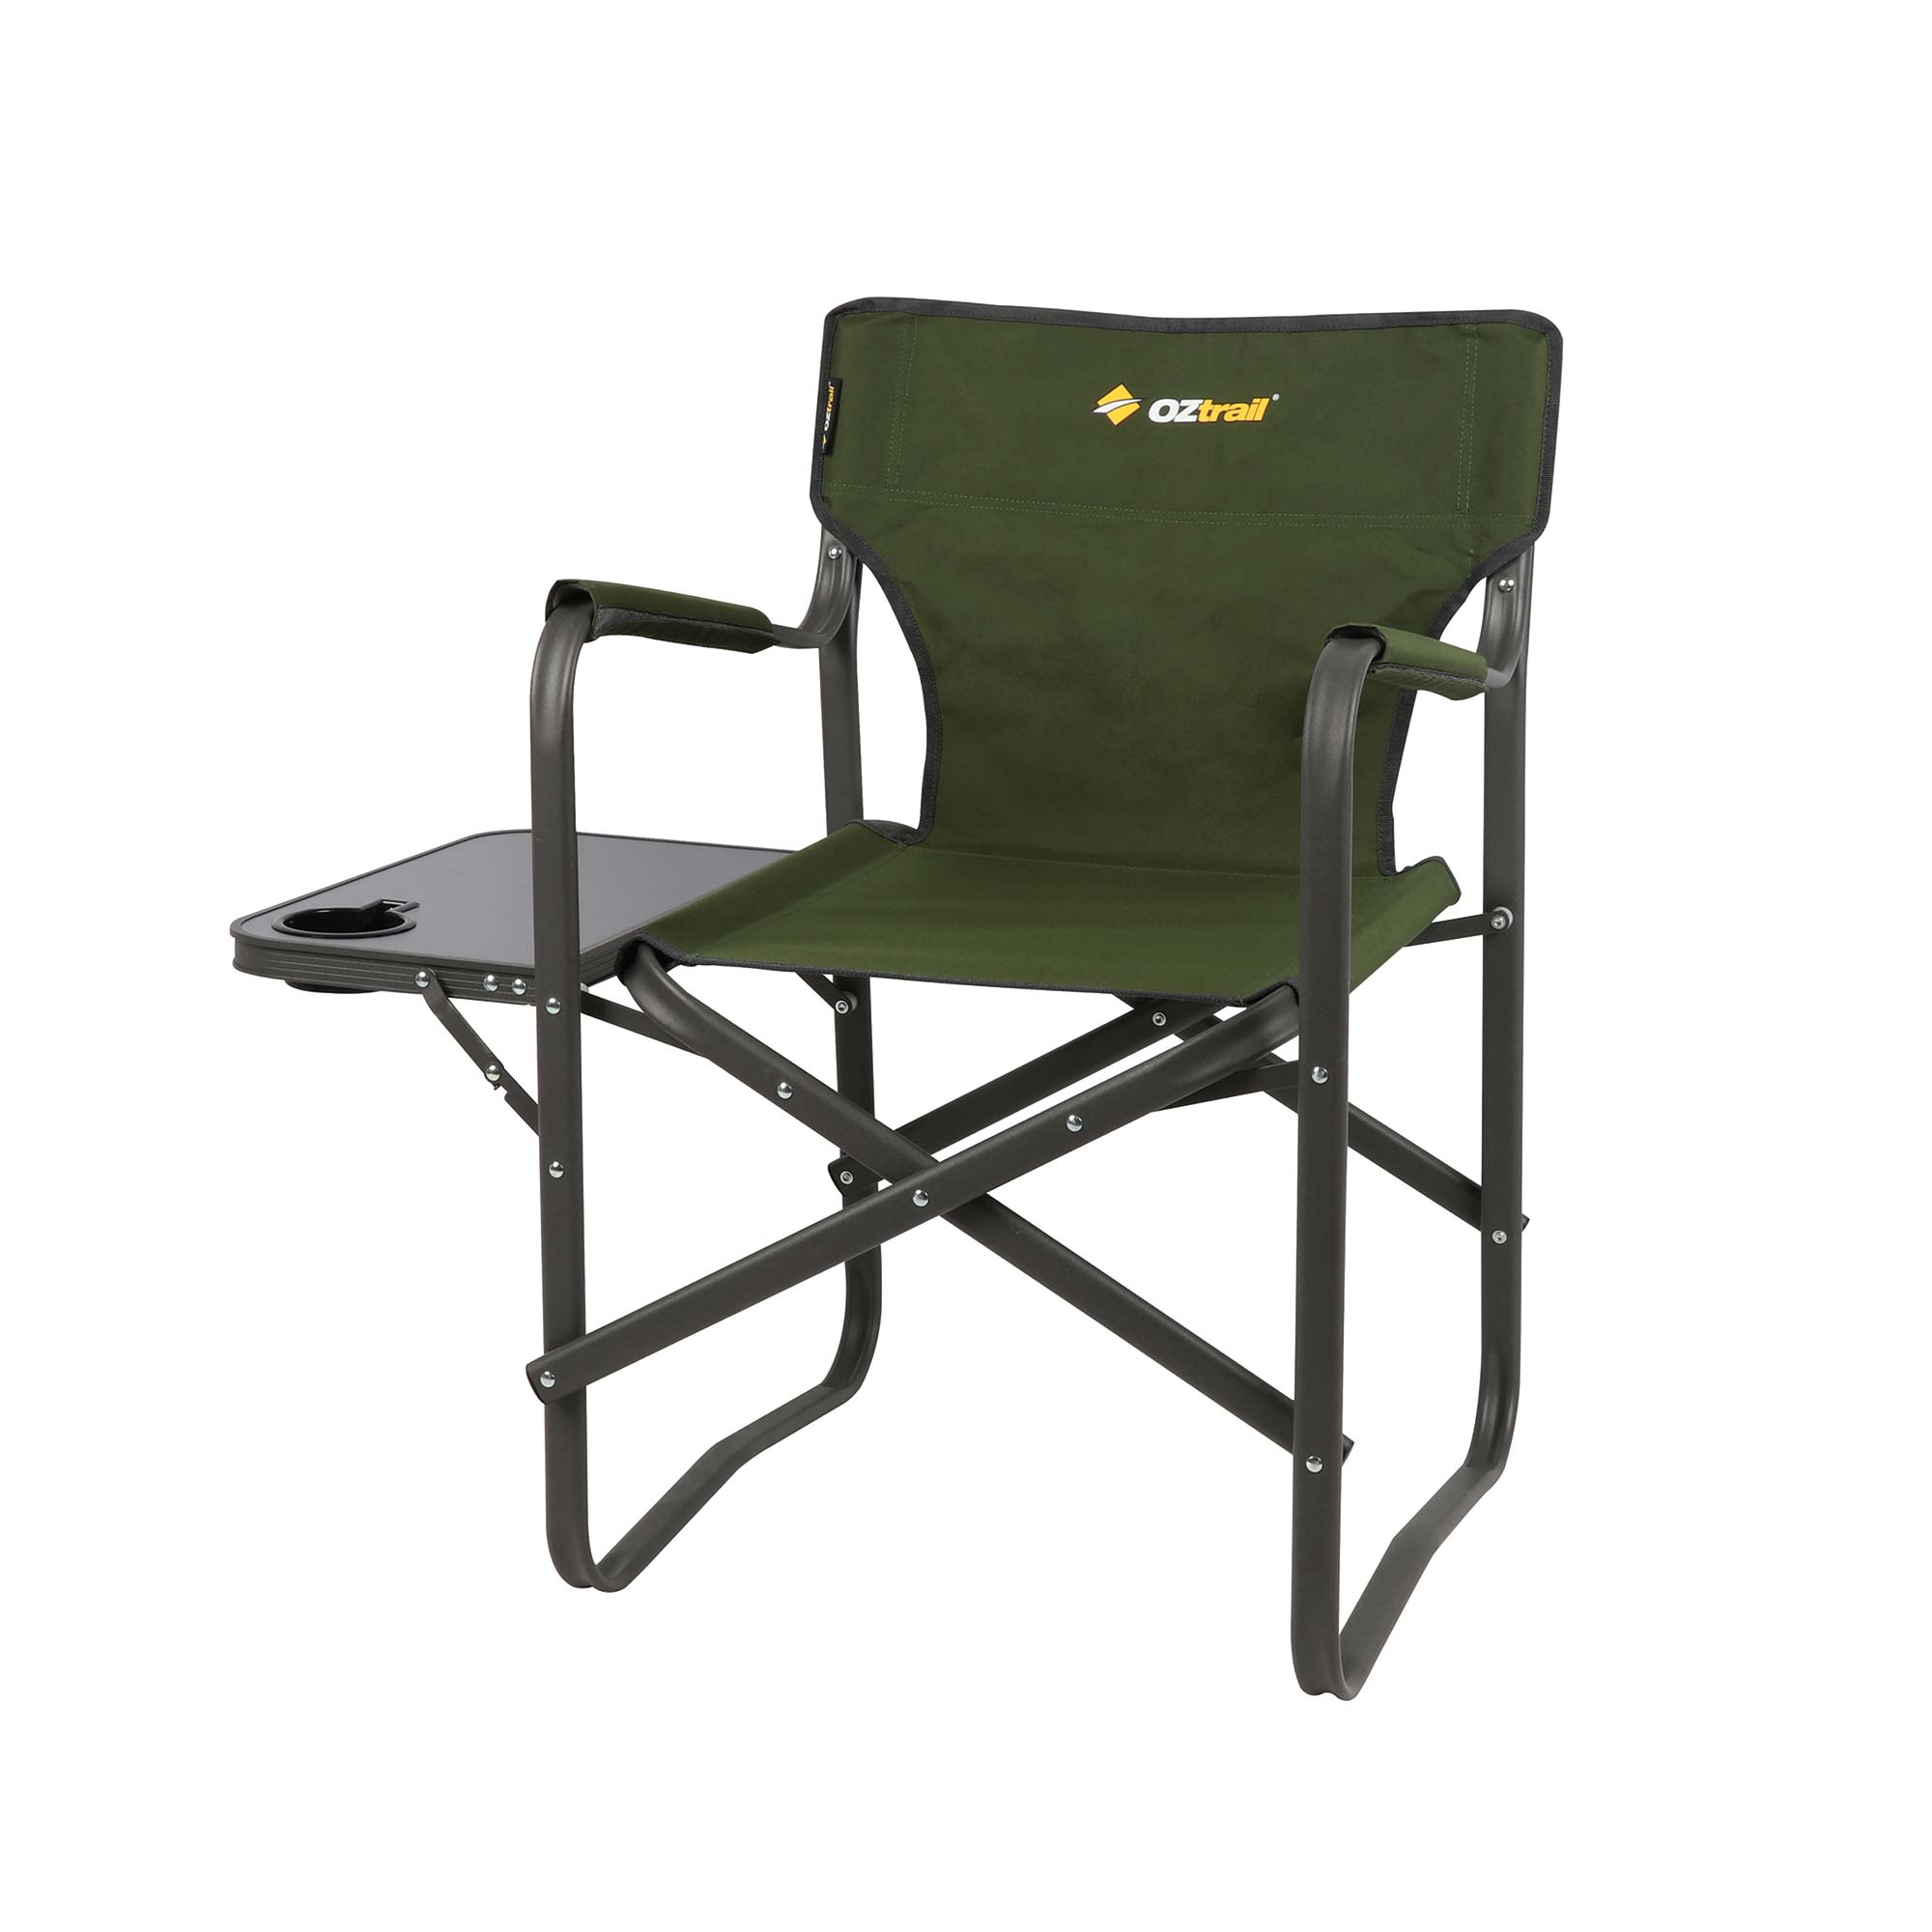 Oztrail Directors Classic Arm Chair w/ Table